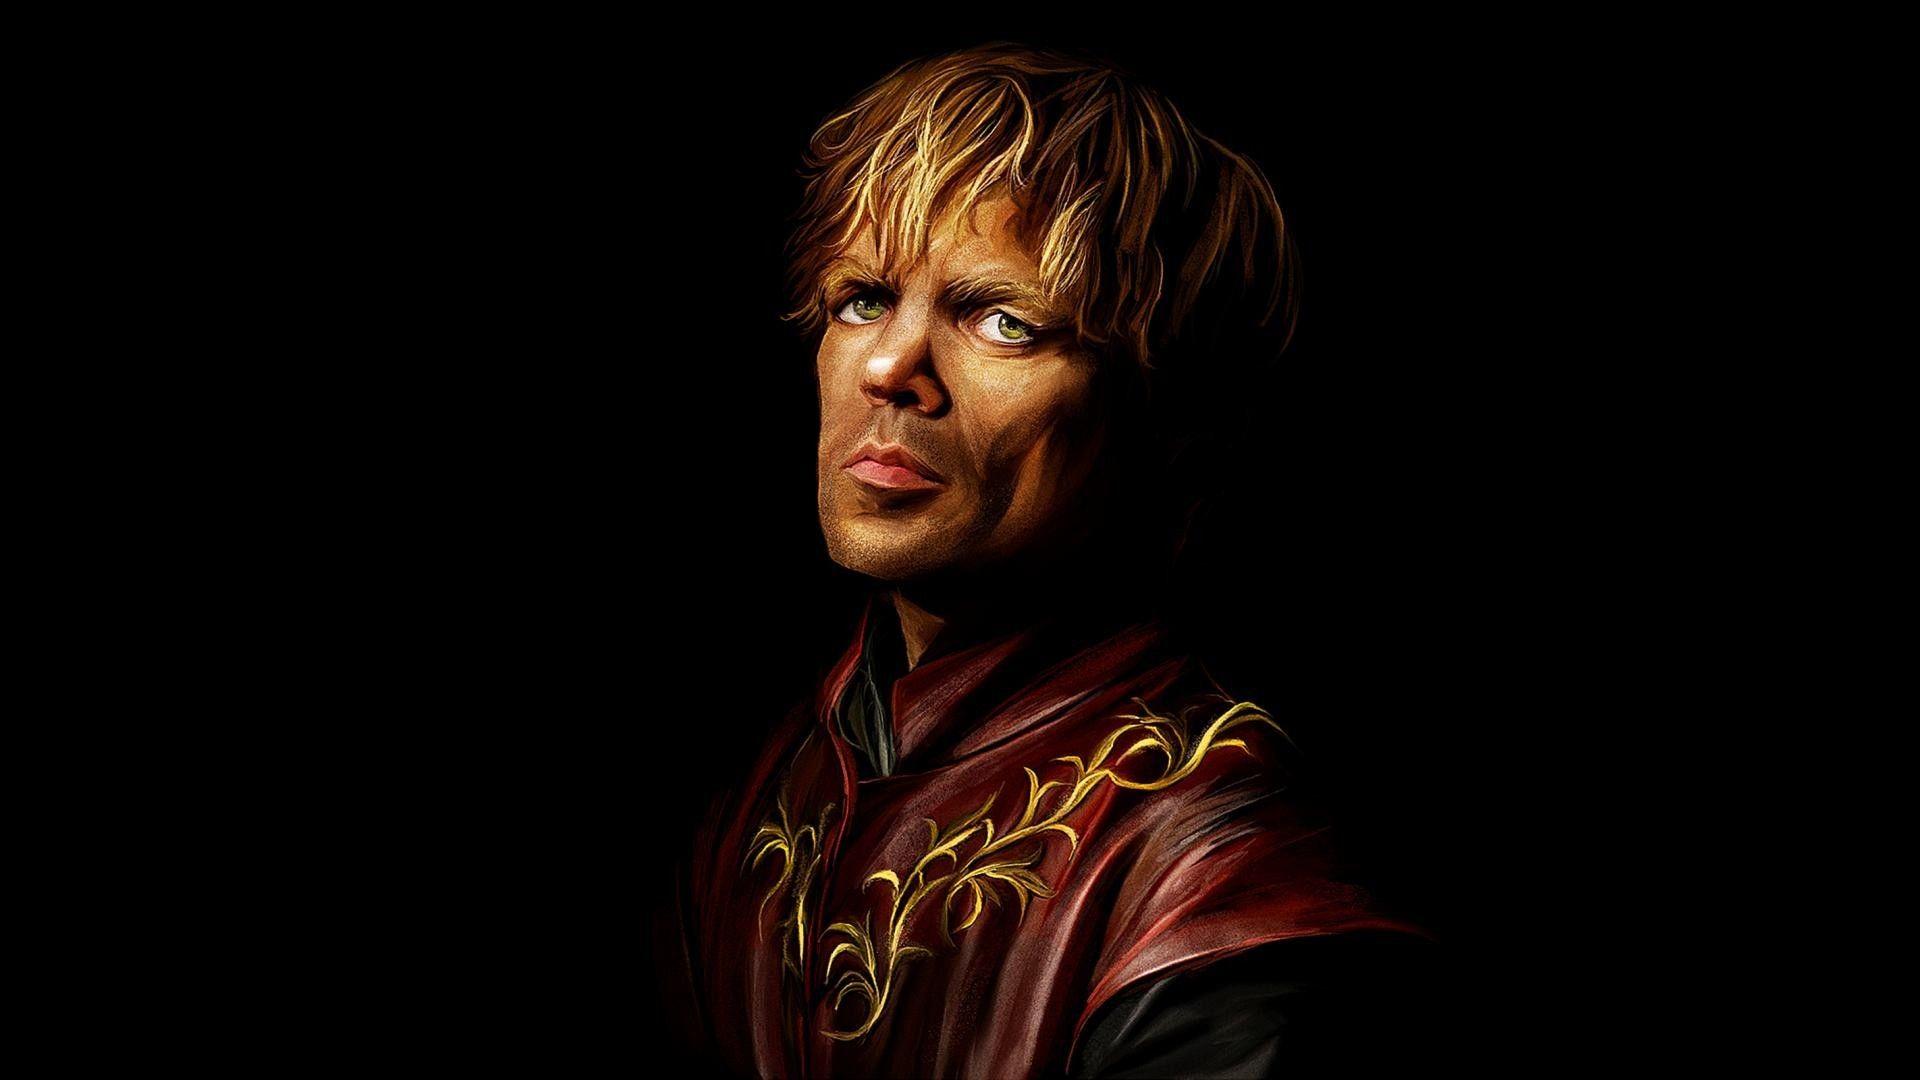 Tyrion Lannister, High Definition, High Quality, Widescreen